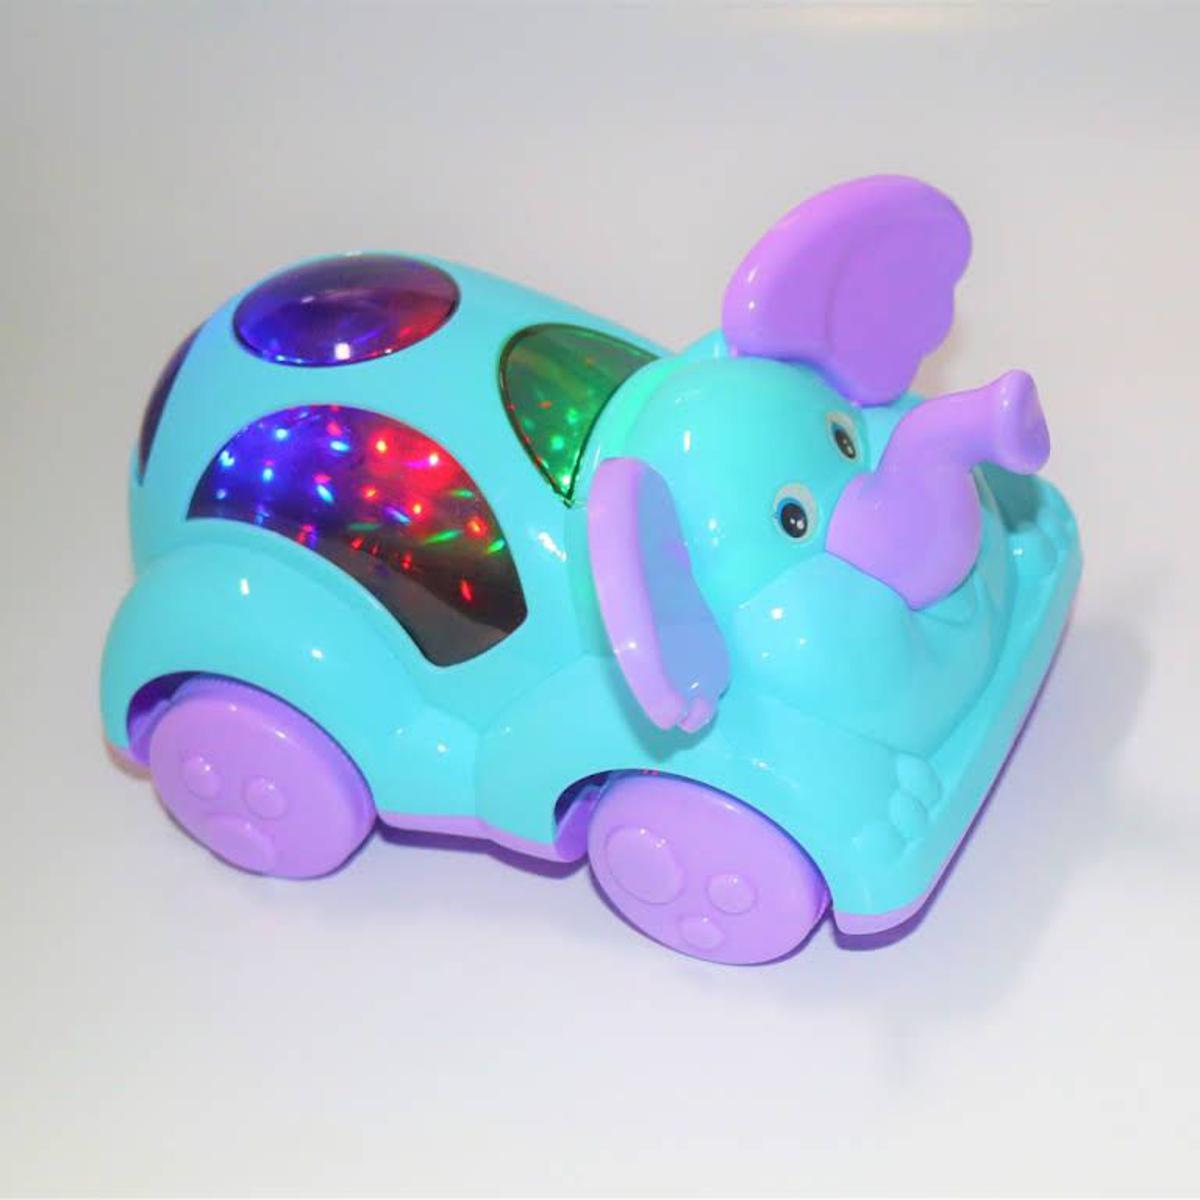 Lighting and music elephant toy for kids.